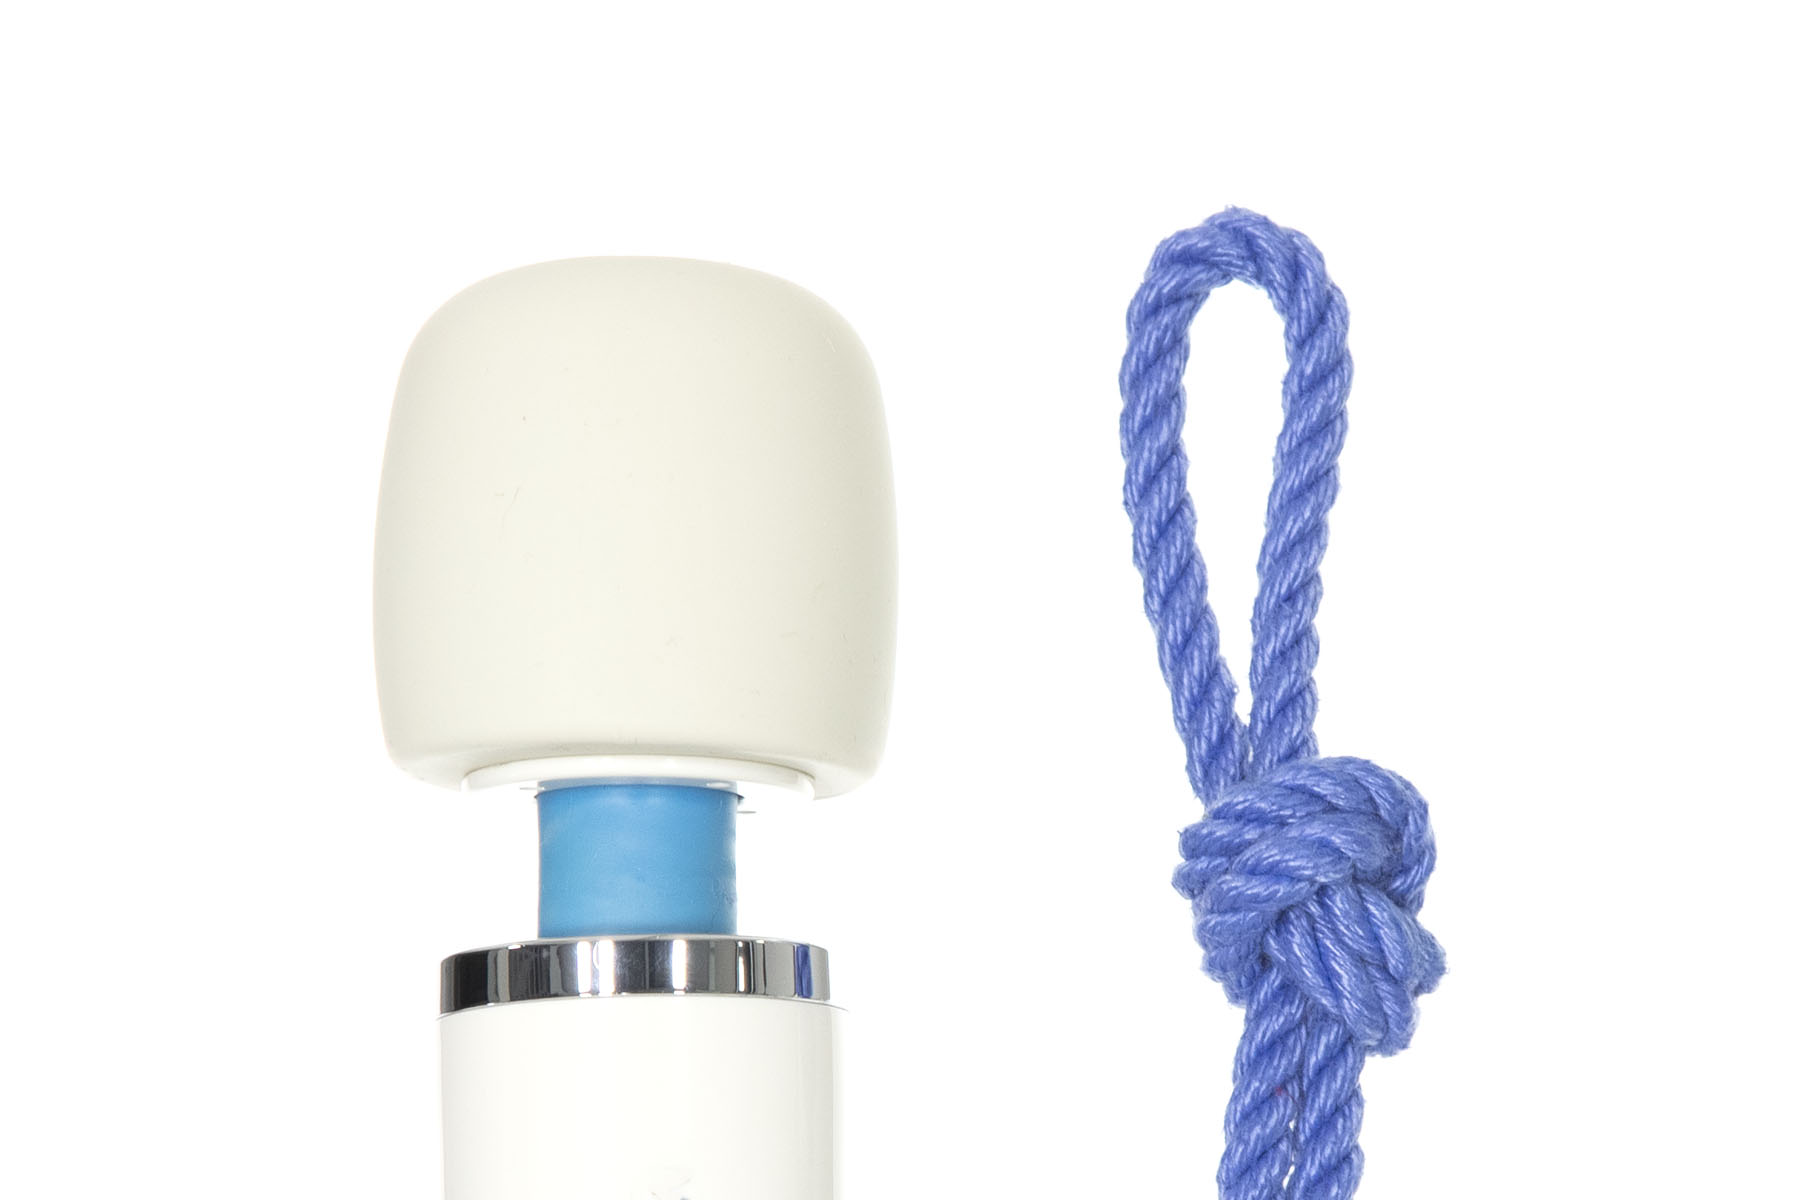 A closeup view of the head of a Magic Wand style vibrator. It has a large white drum-shaped head, connected to the body of the vibrator by a thin blue shaft. Next to the vibrator is a doubled blue rope with an overhand knot tied in the bight, leaving a three inch long loop.